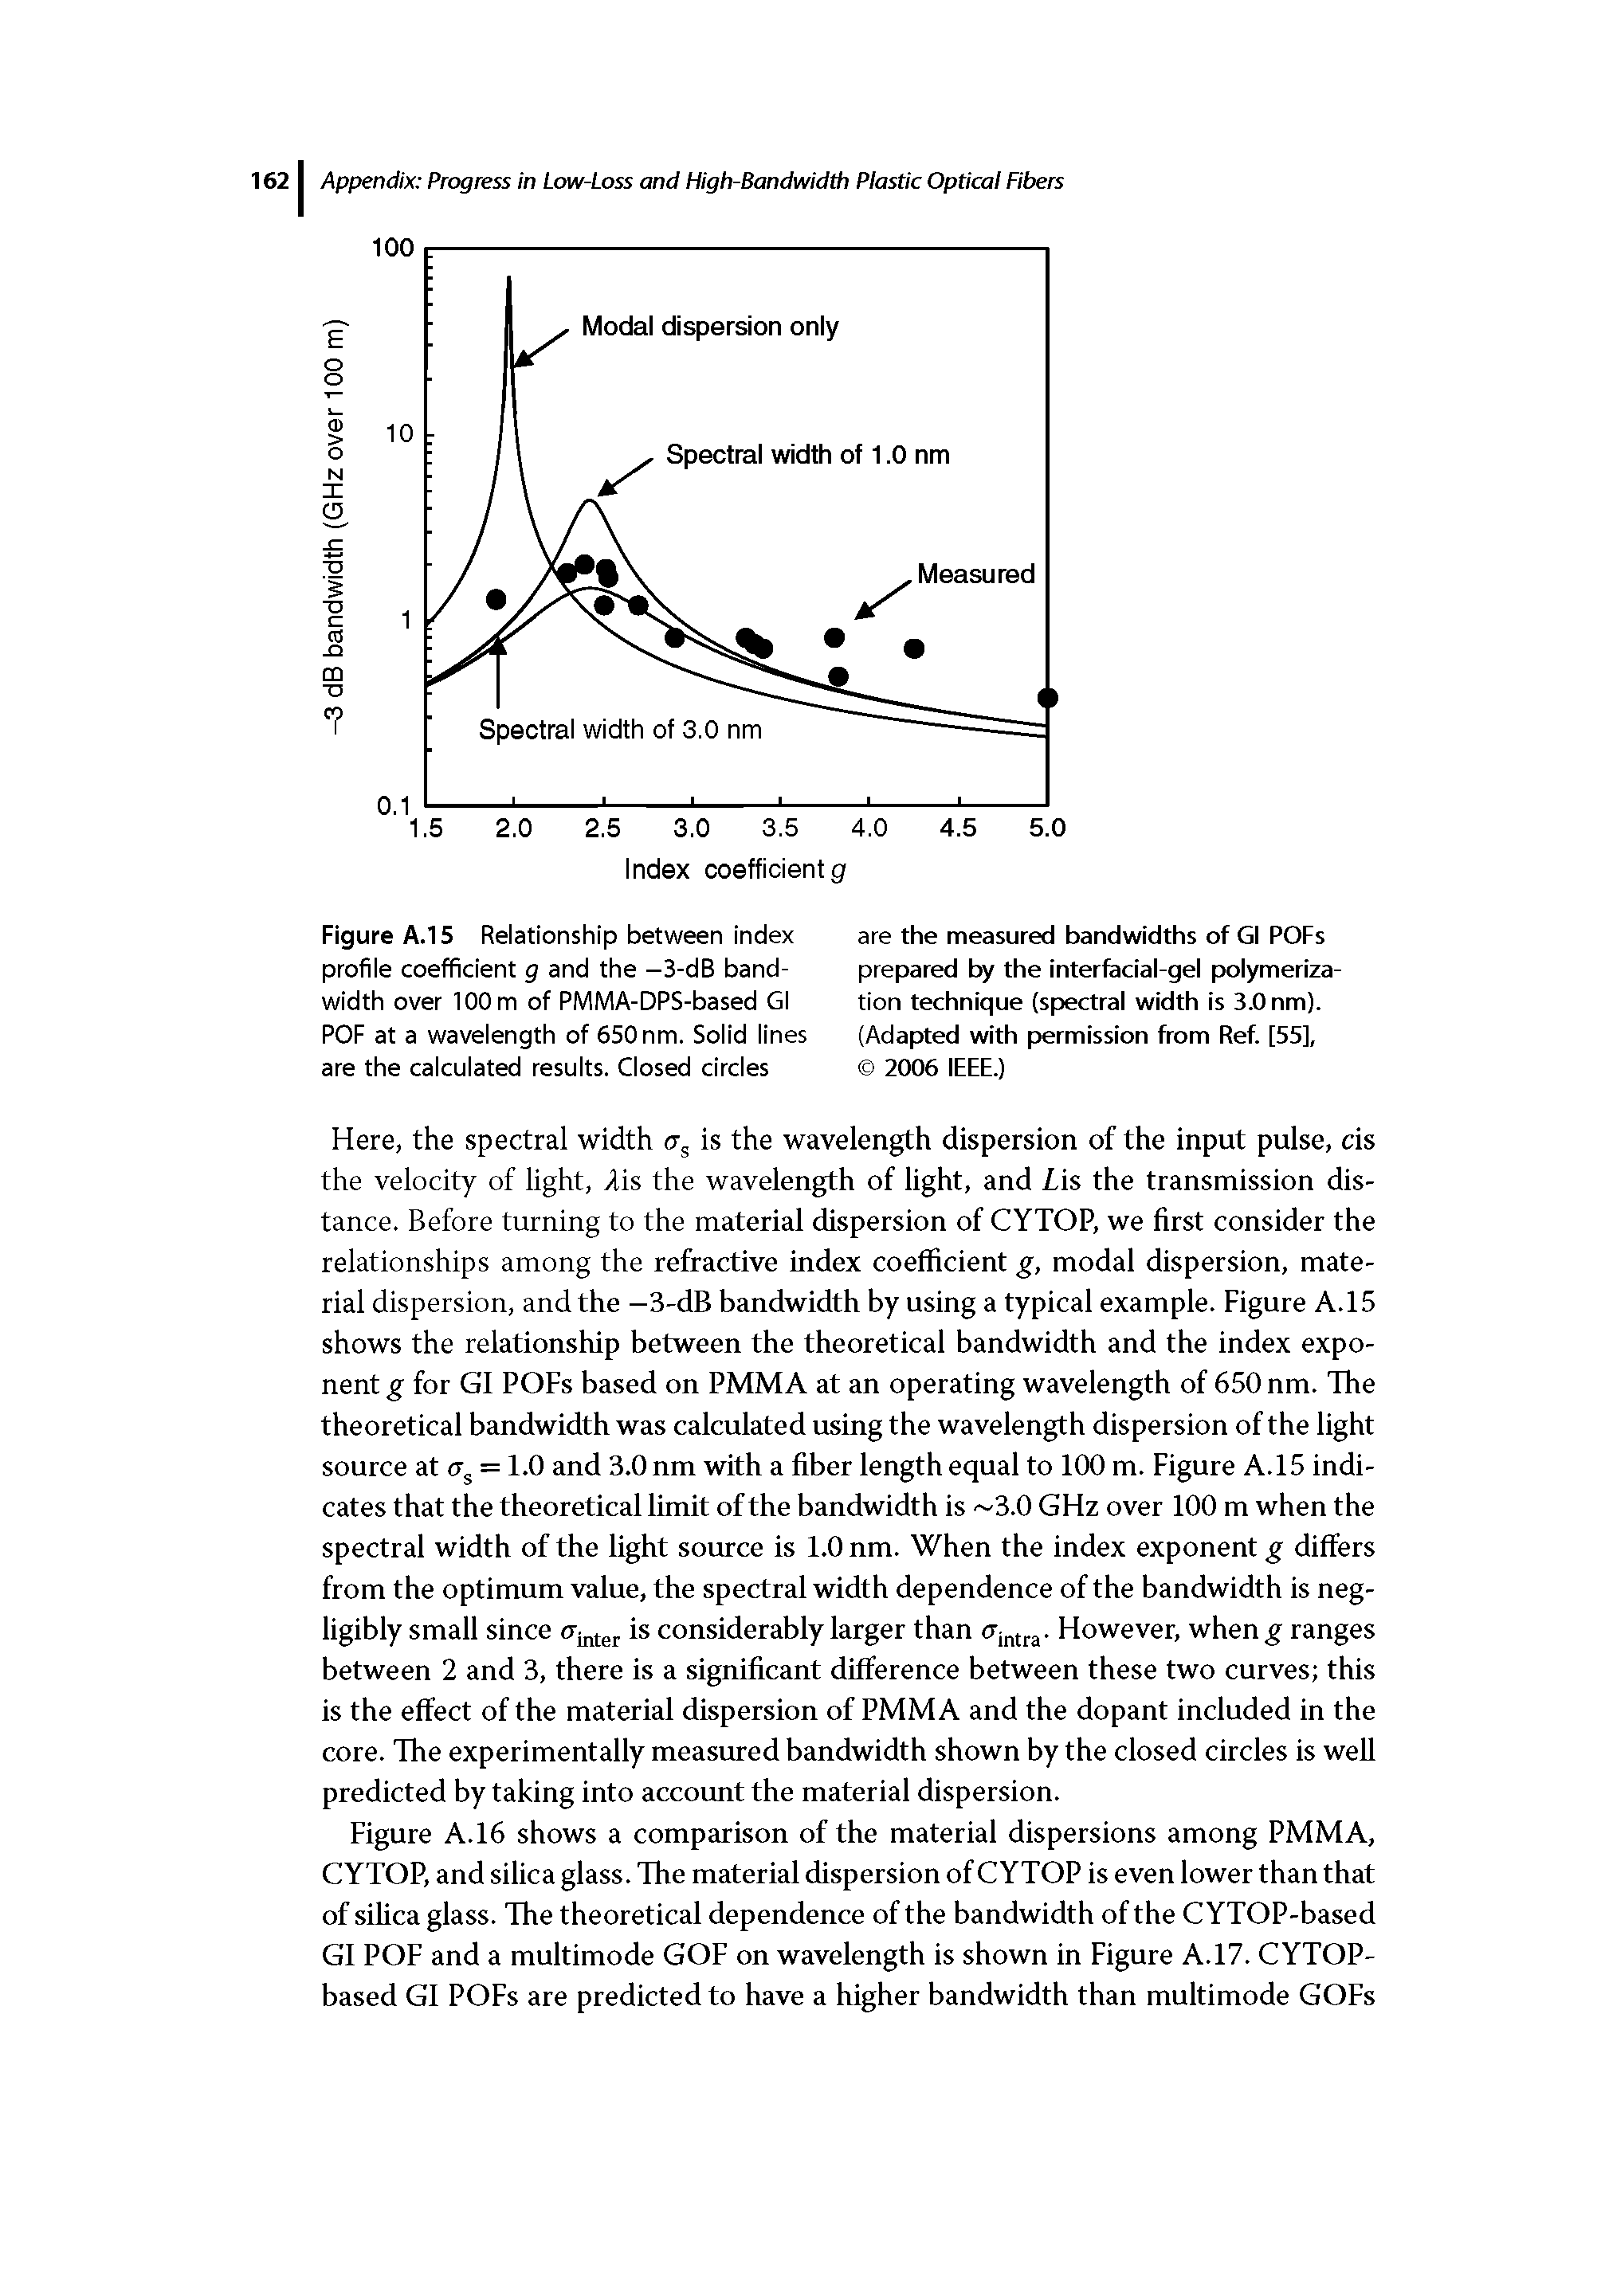 Figure A.16 shows a comparison of the material dispersions among PMMA, CYTOP, and silica glass. The material dispersion of CYTOP is even lower than that of silica glass. The theoretical dependence of the bandwidth of the CYTOP-based Gl POF and a multimode GOF on wavelength is shown in Figure A.17. CYTOP-based Gl POFs are predicted to have a higher bandwidth than multimode GOFs...